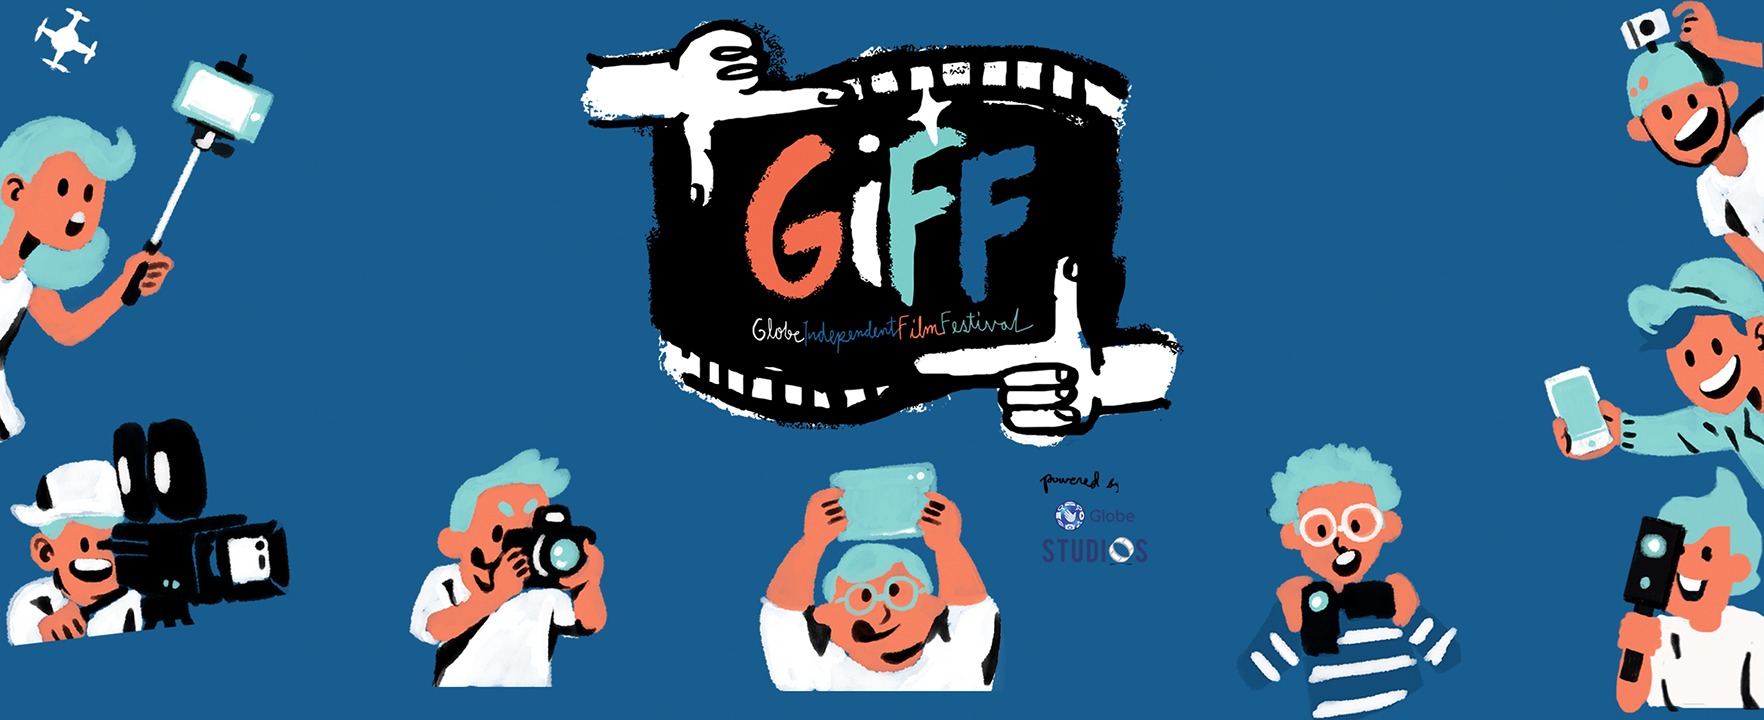 The First of Its Kind: Online Film Festival via GIFF